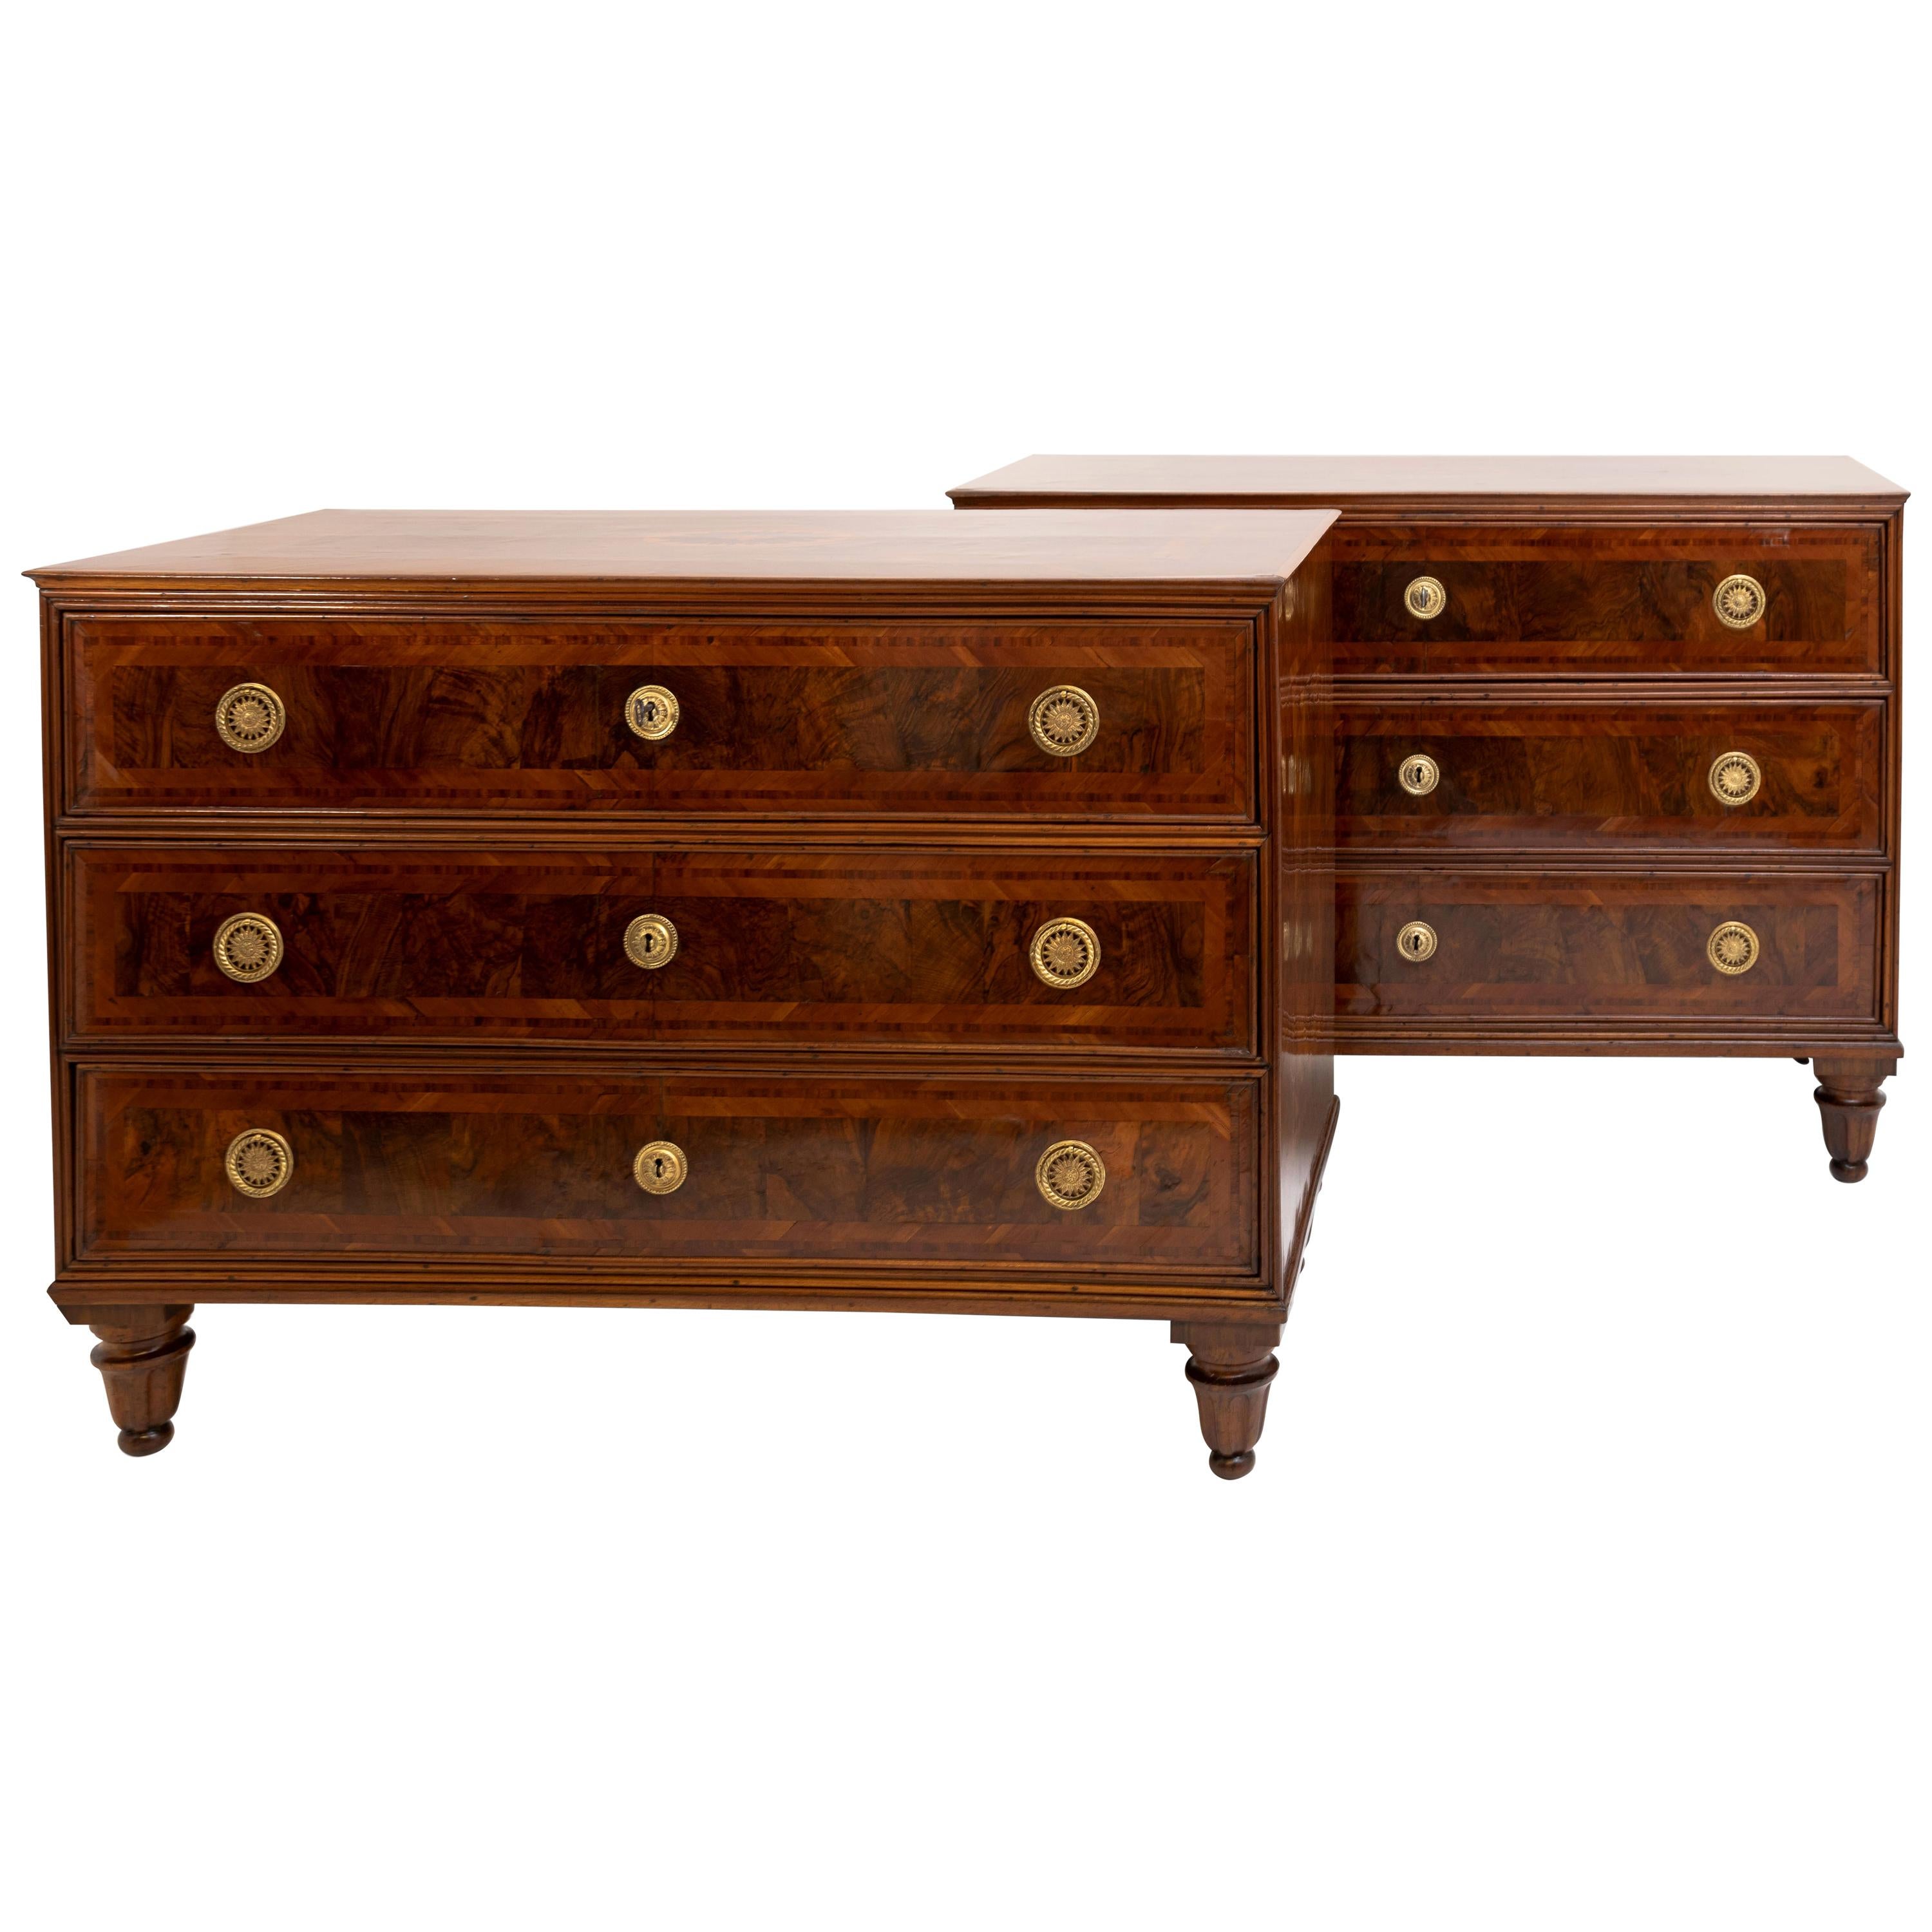 Pair of Walnut Louis Seize Chests of Drawers, Late 18th Century